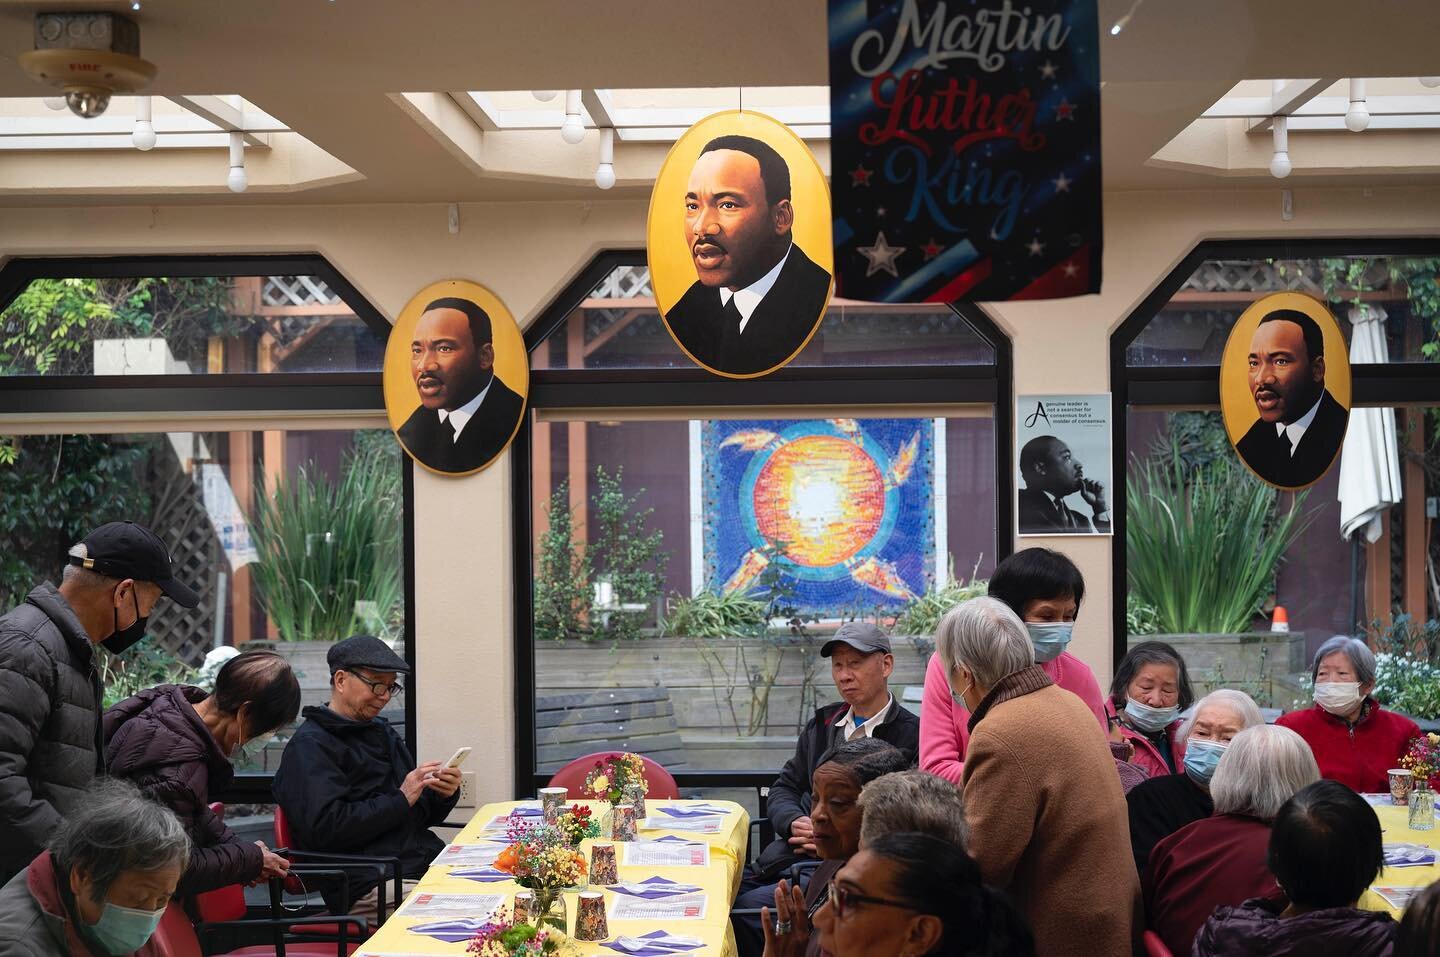 Our residents enjoyed Martin Luther King Jr celebrations last week across our TODCO buildings located in San Francisco&rsquo;s South of Market neighborhood. We had music, food, speeches, educational videos and much more in honor of Doctor King&rsquo;